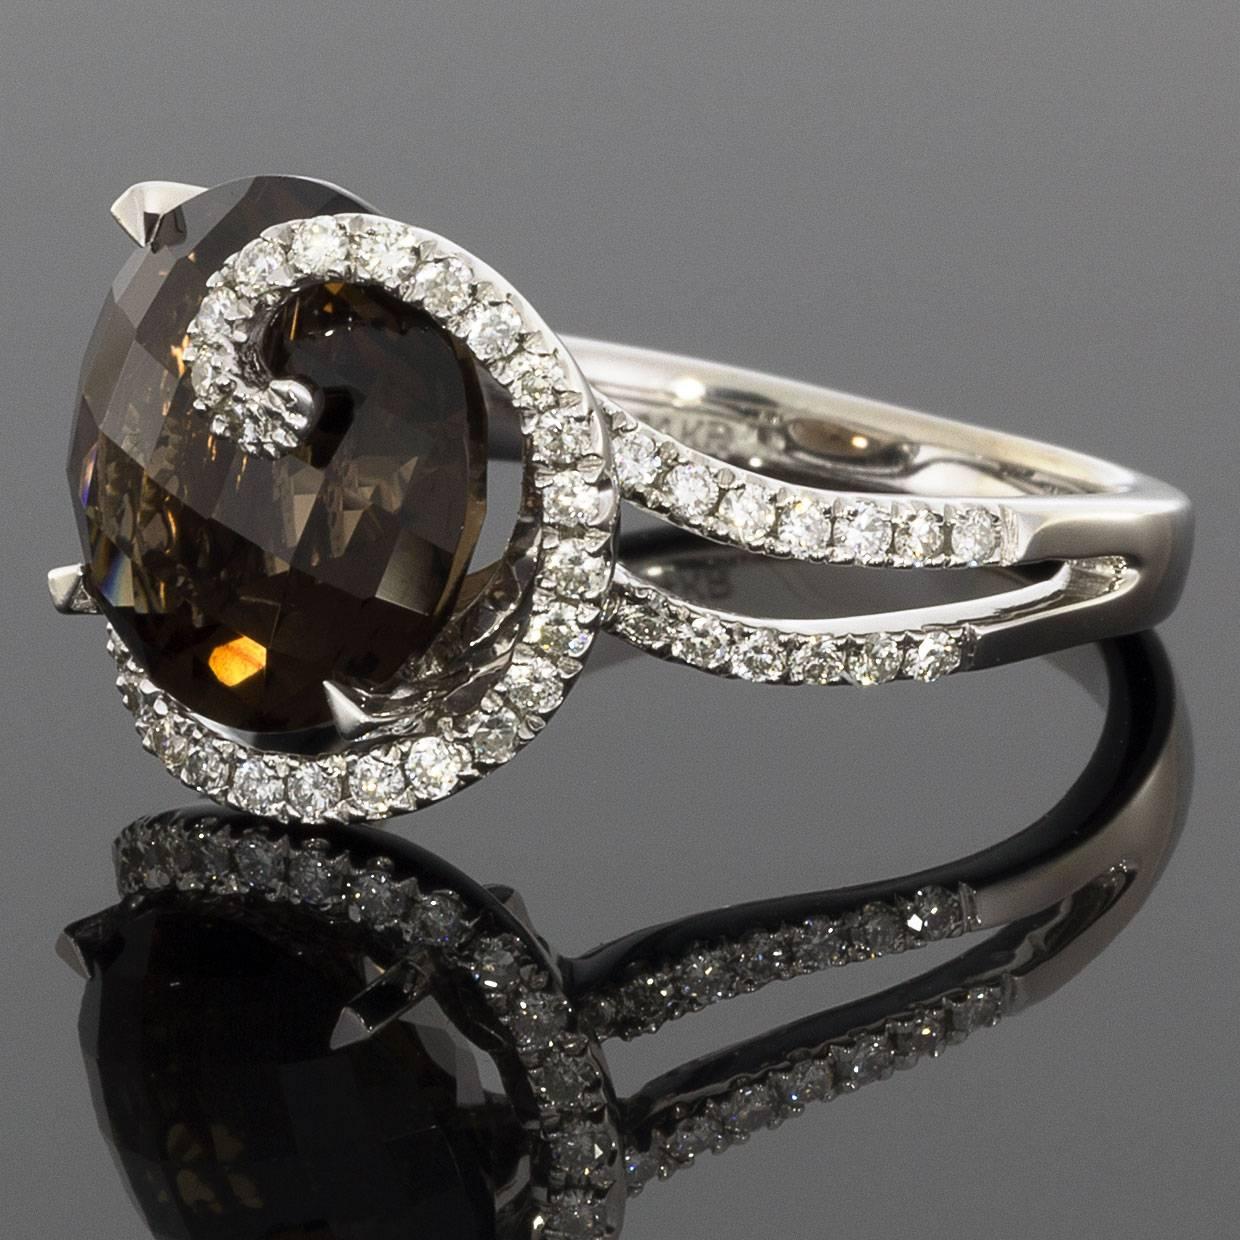 This stunning ring features an 11 mm, round, checkerboard faceted smokey quartz gemstone center. Radiant & warm with its beautiful shades of brown, this smokey quartz is surrounded by graceful diamond swirl. Comprised of 14 karat white gold, the